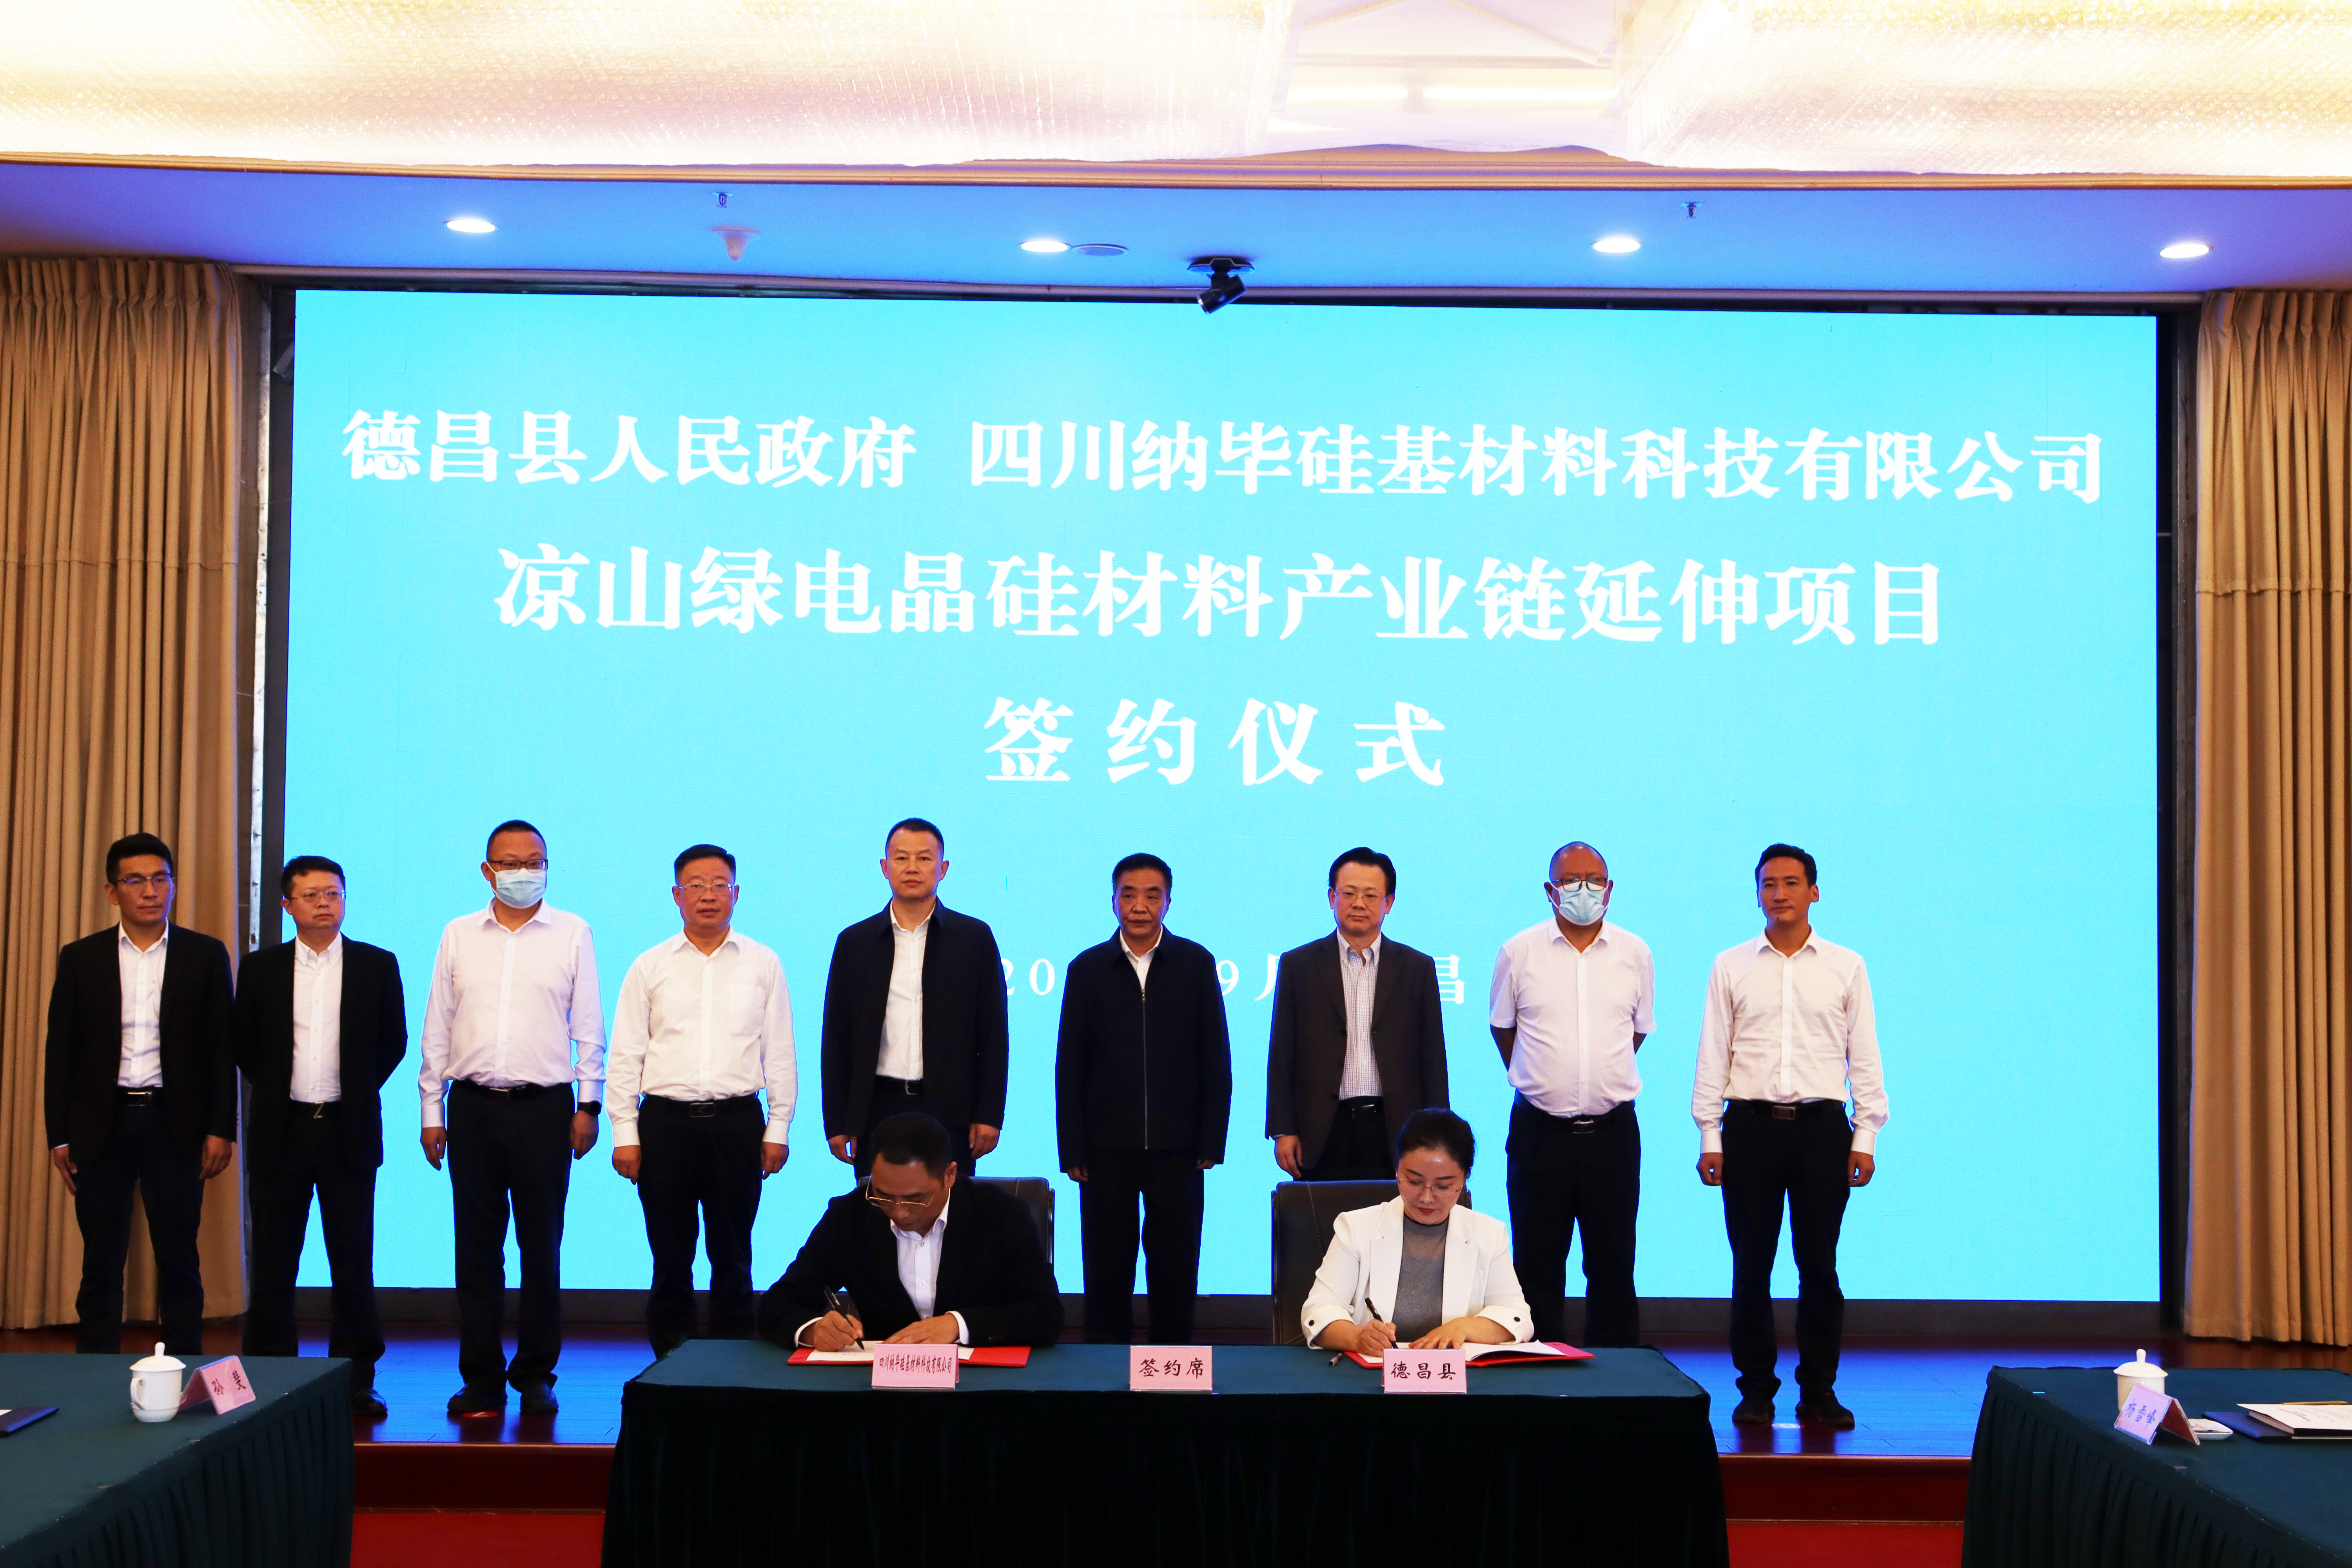 We held a contract signing ceremony for the extension project of Liangshan green crystalline silicon material industry chain with Dechang County Government of the People's Republic of China